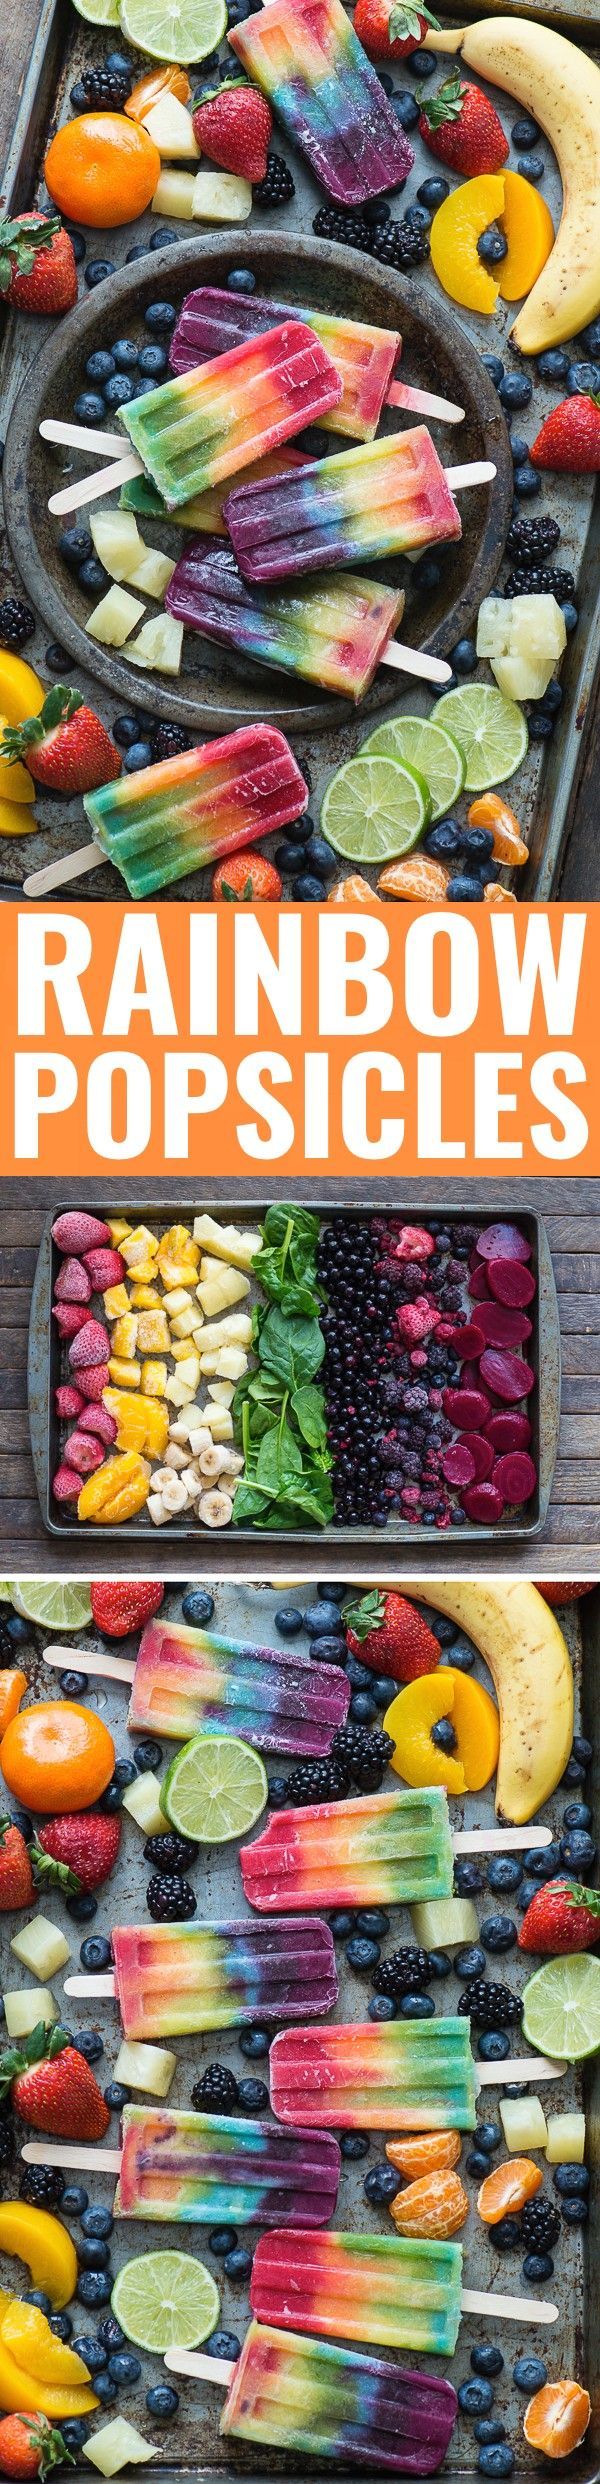 Outstanding 7 layer rainbow popsicles! Make your own homemade rainbow popsicles with lots of fresh fruit!